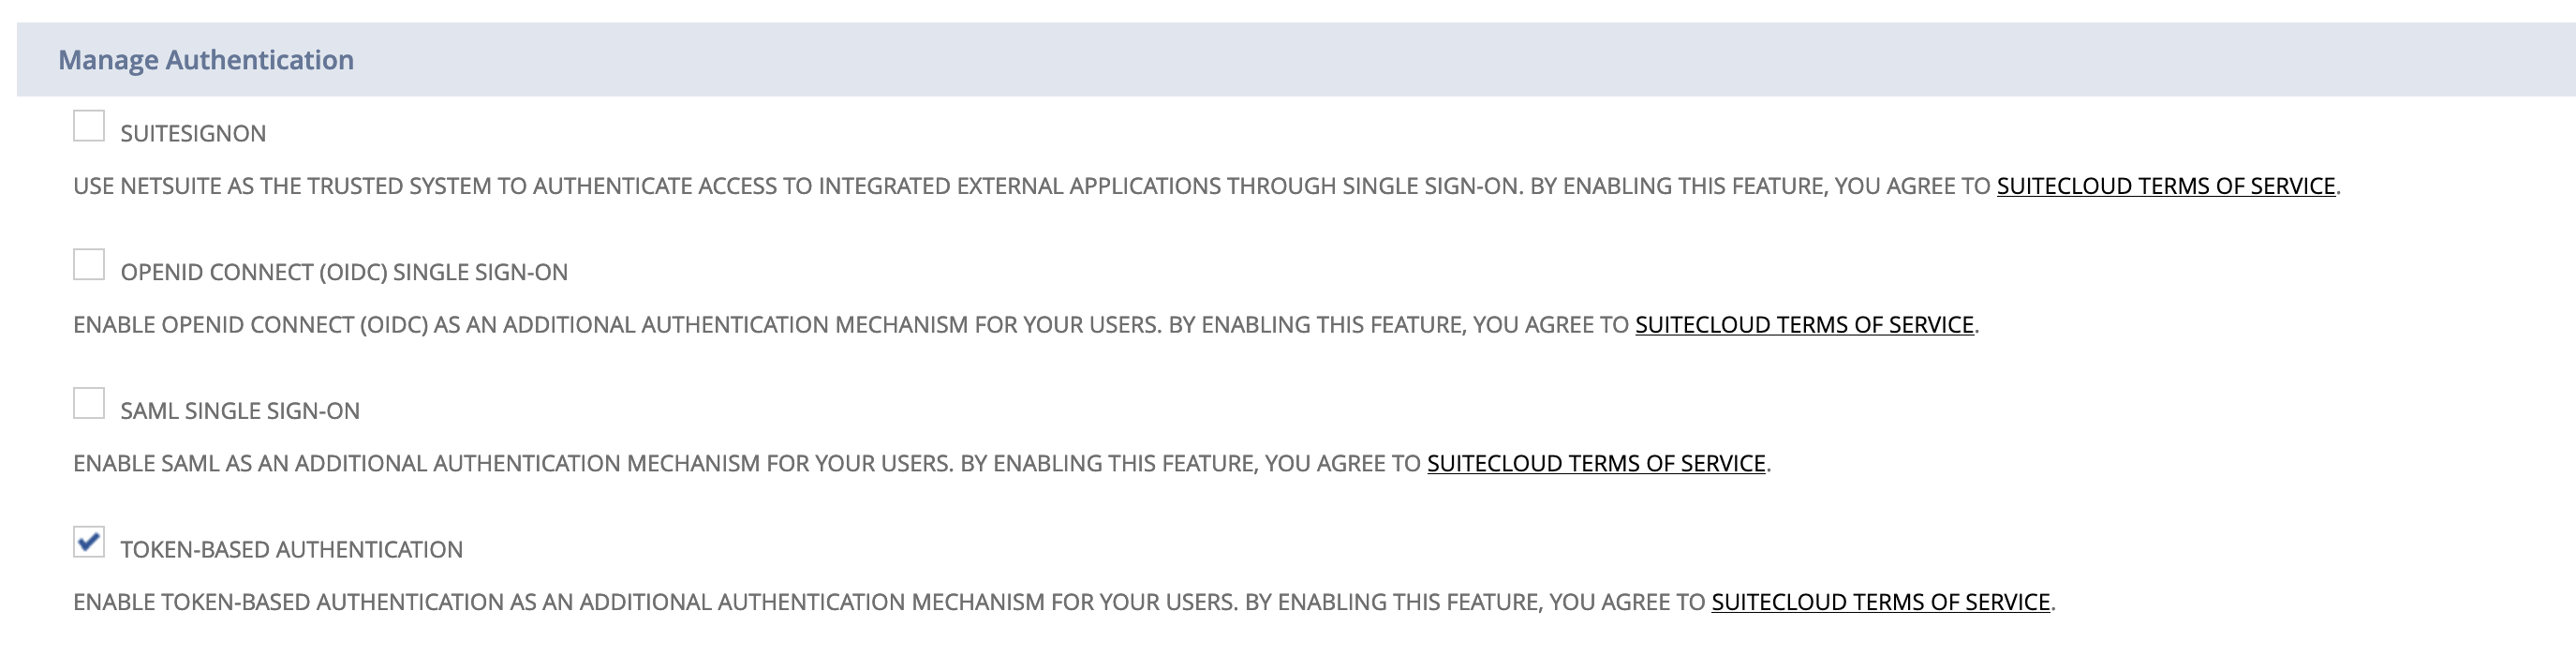 Authentication features to enable.